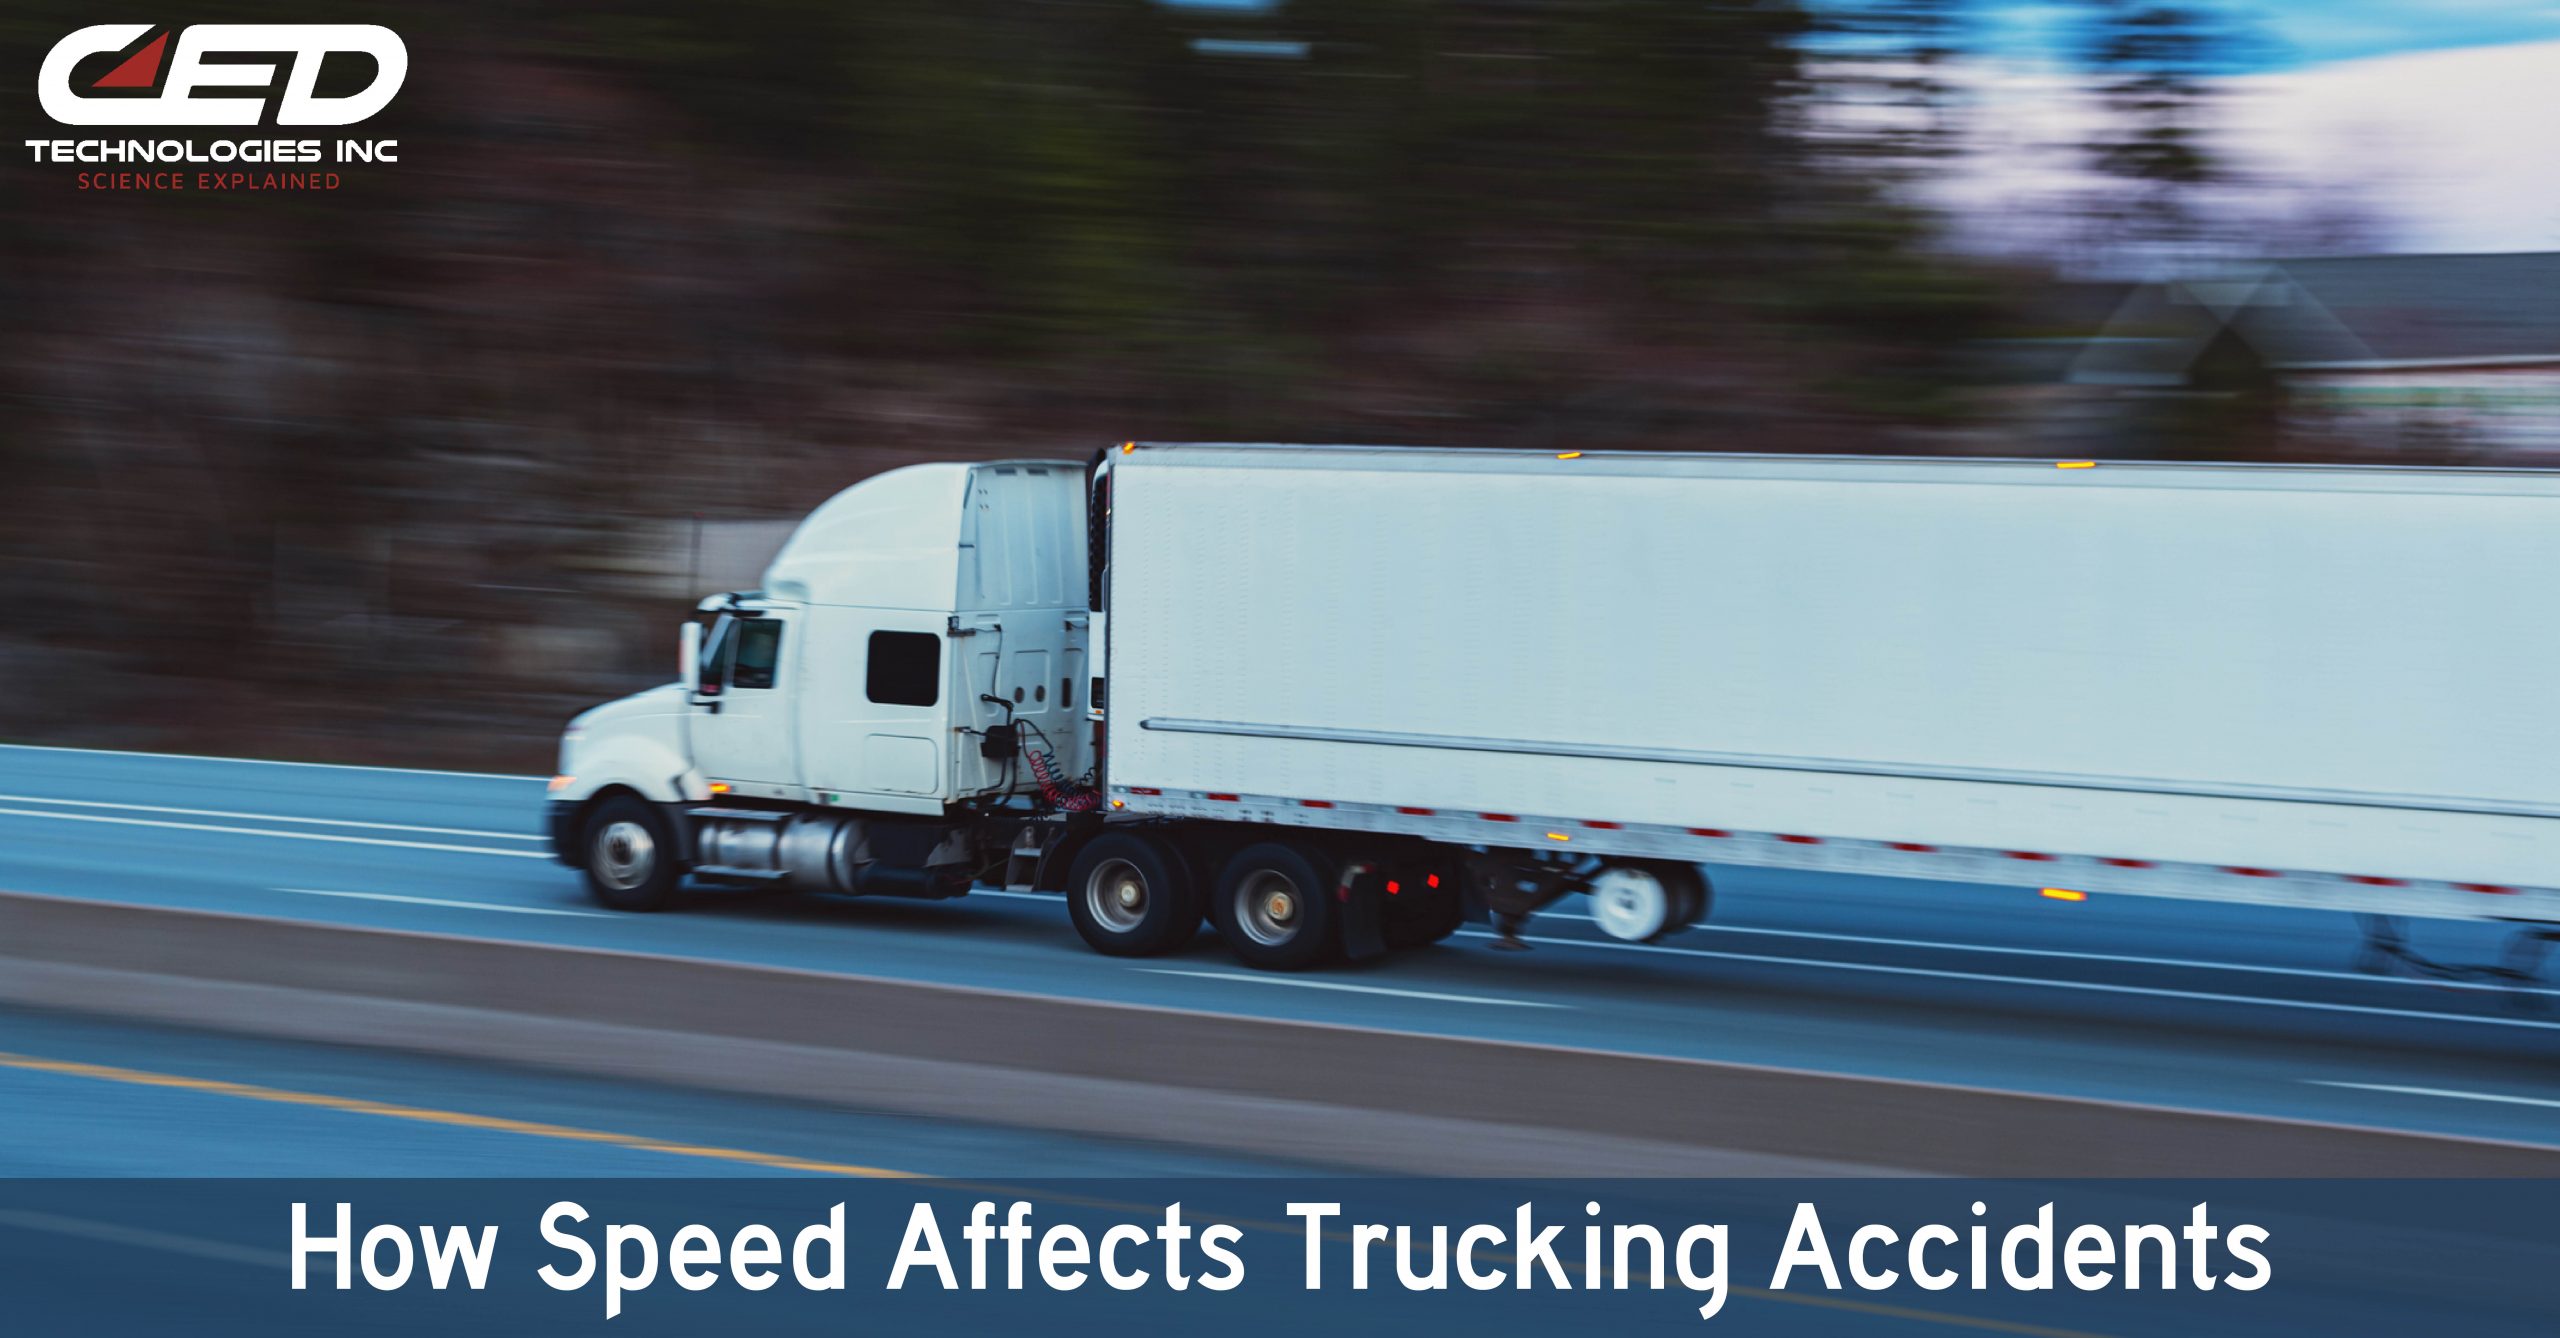 Top Cause of Truck Accidents: Speed